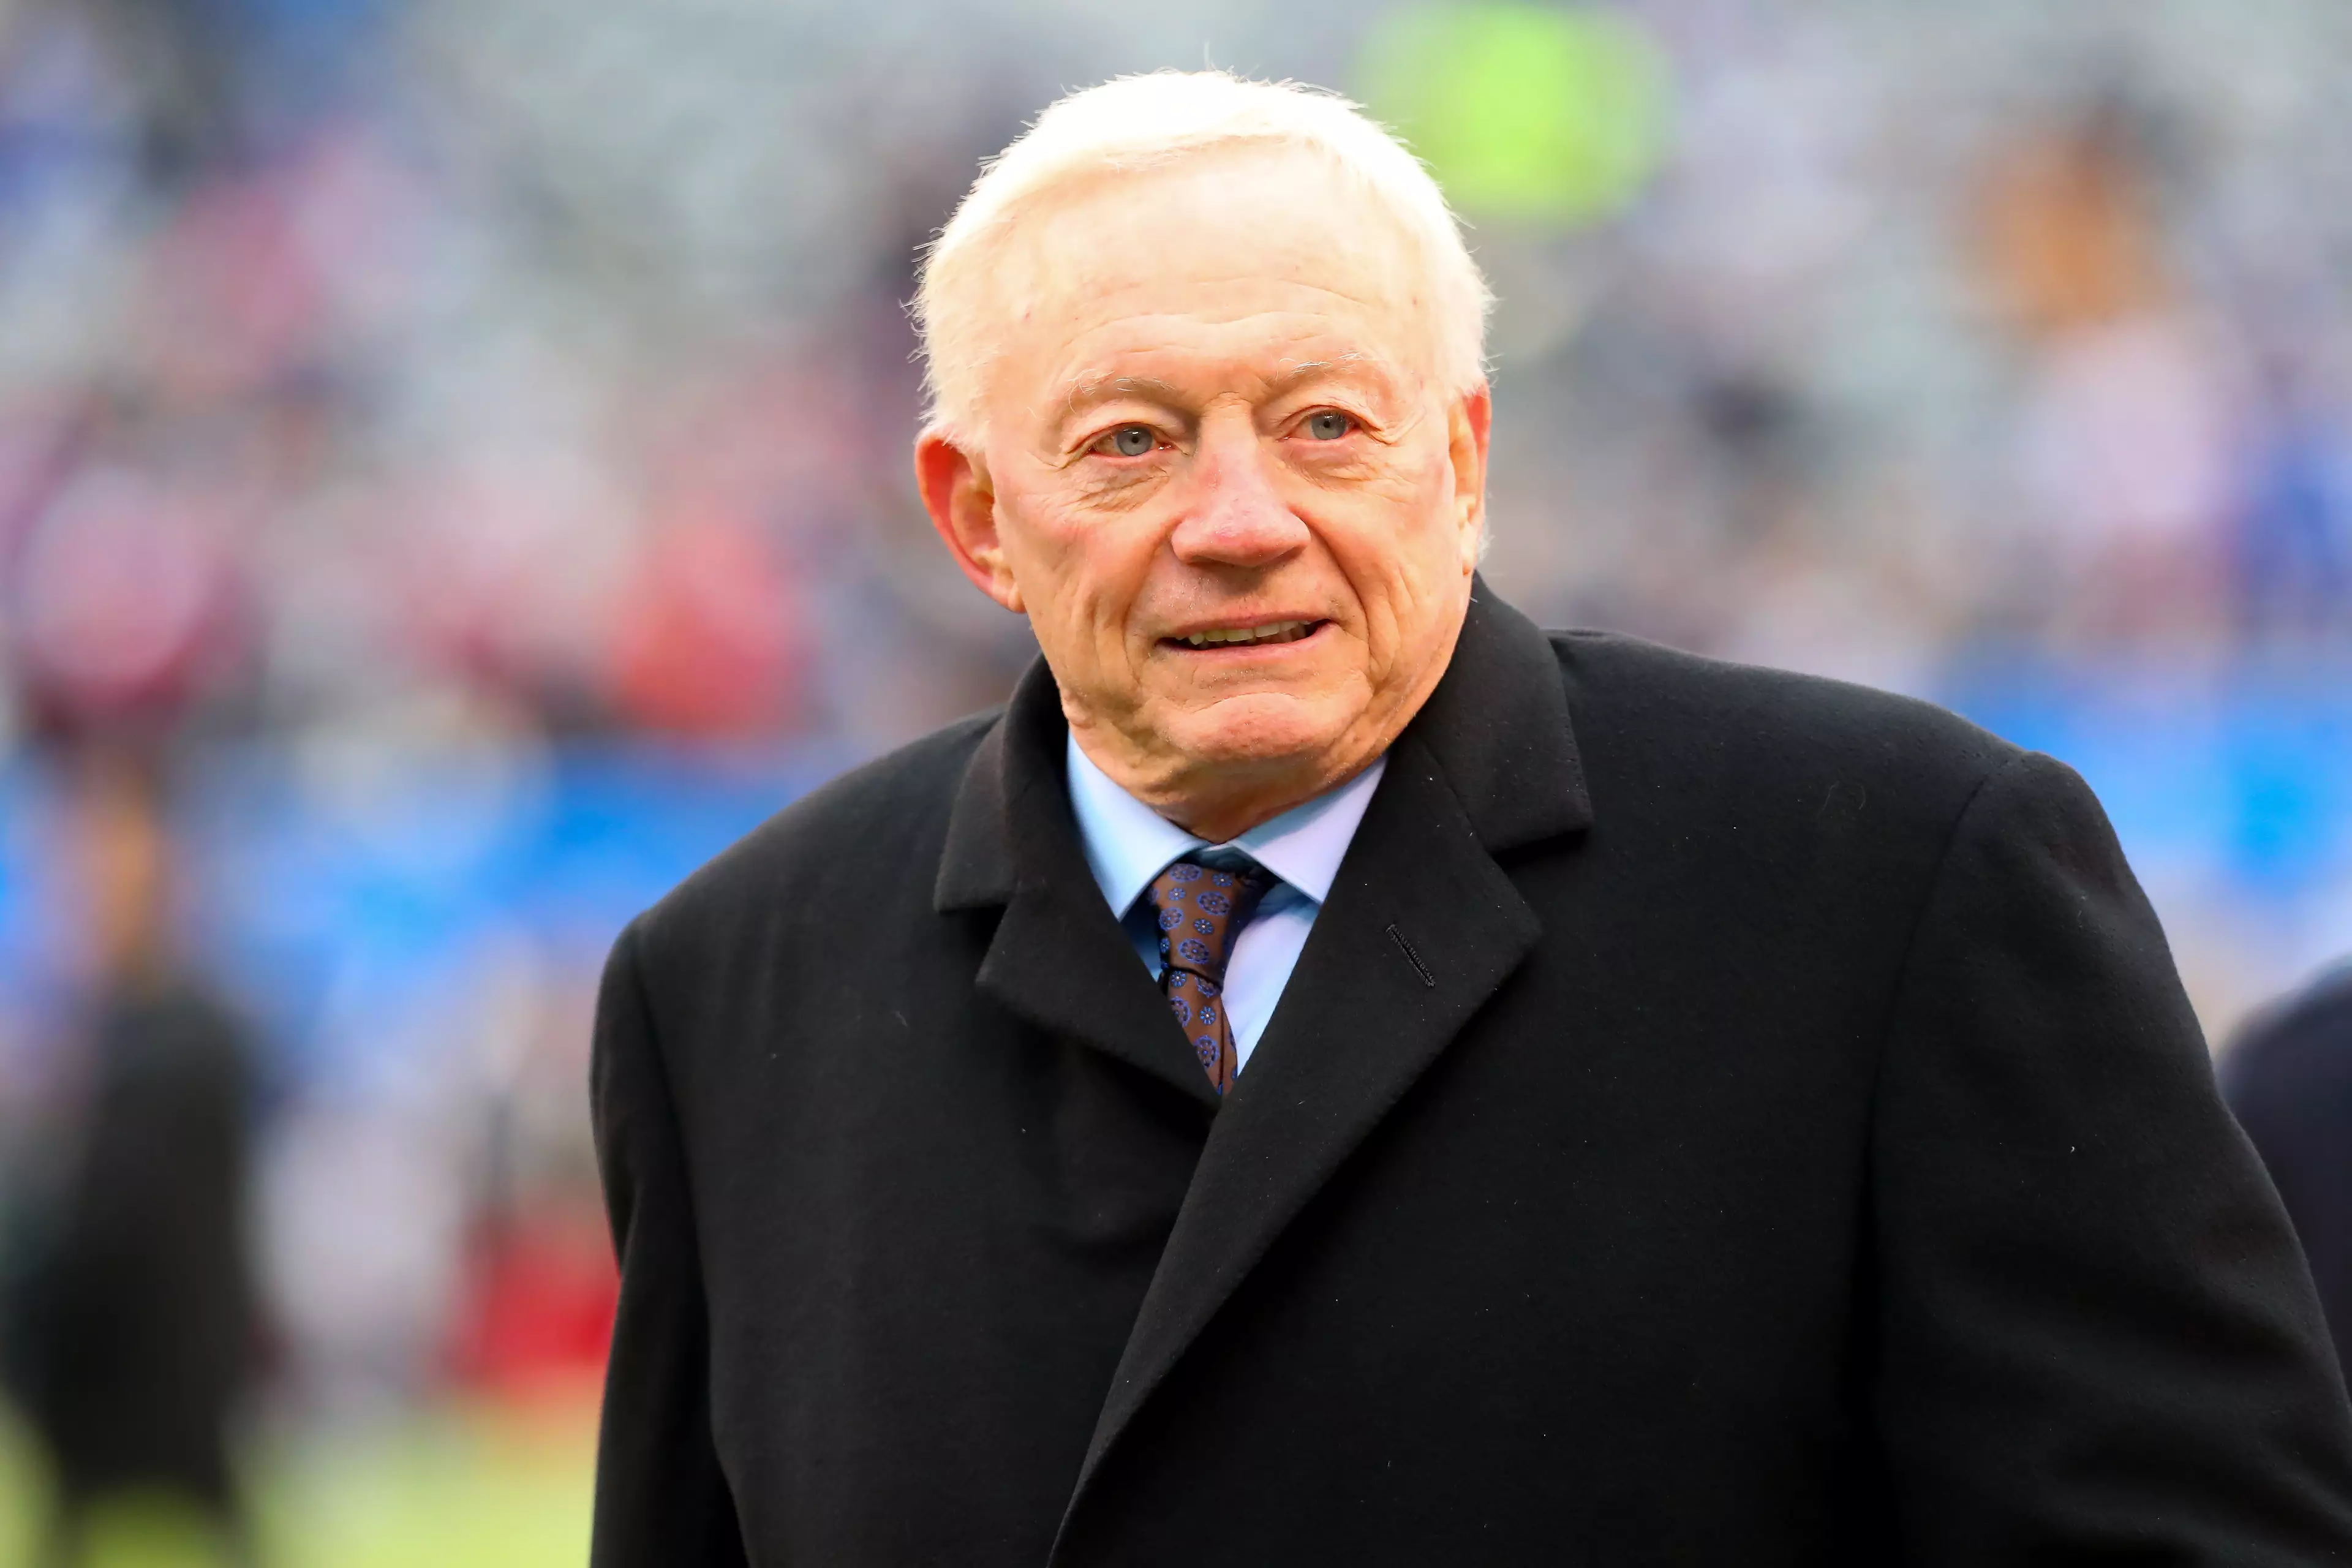 Jerry Jones brought the team for $140m in 1989 and they're now worth $5bn